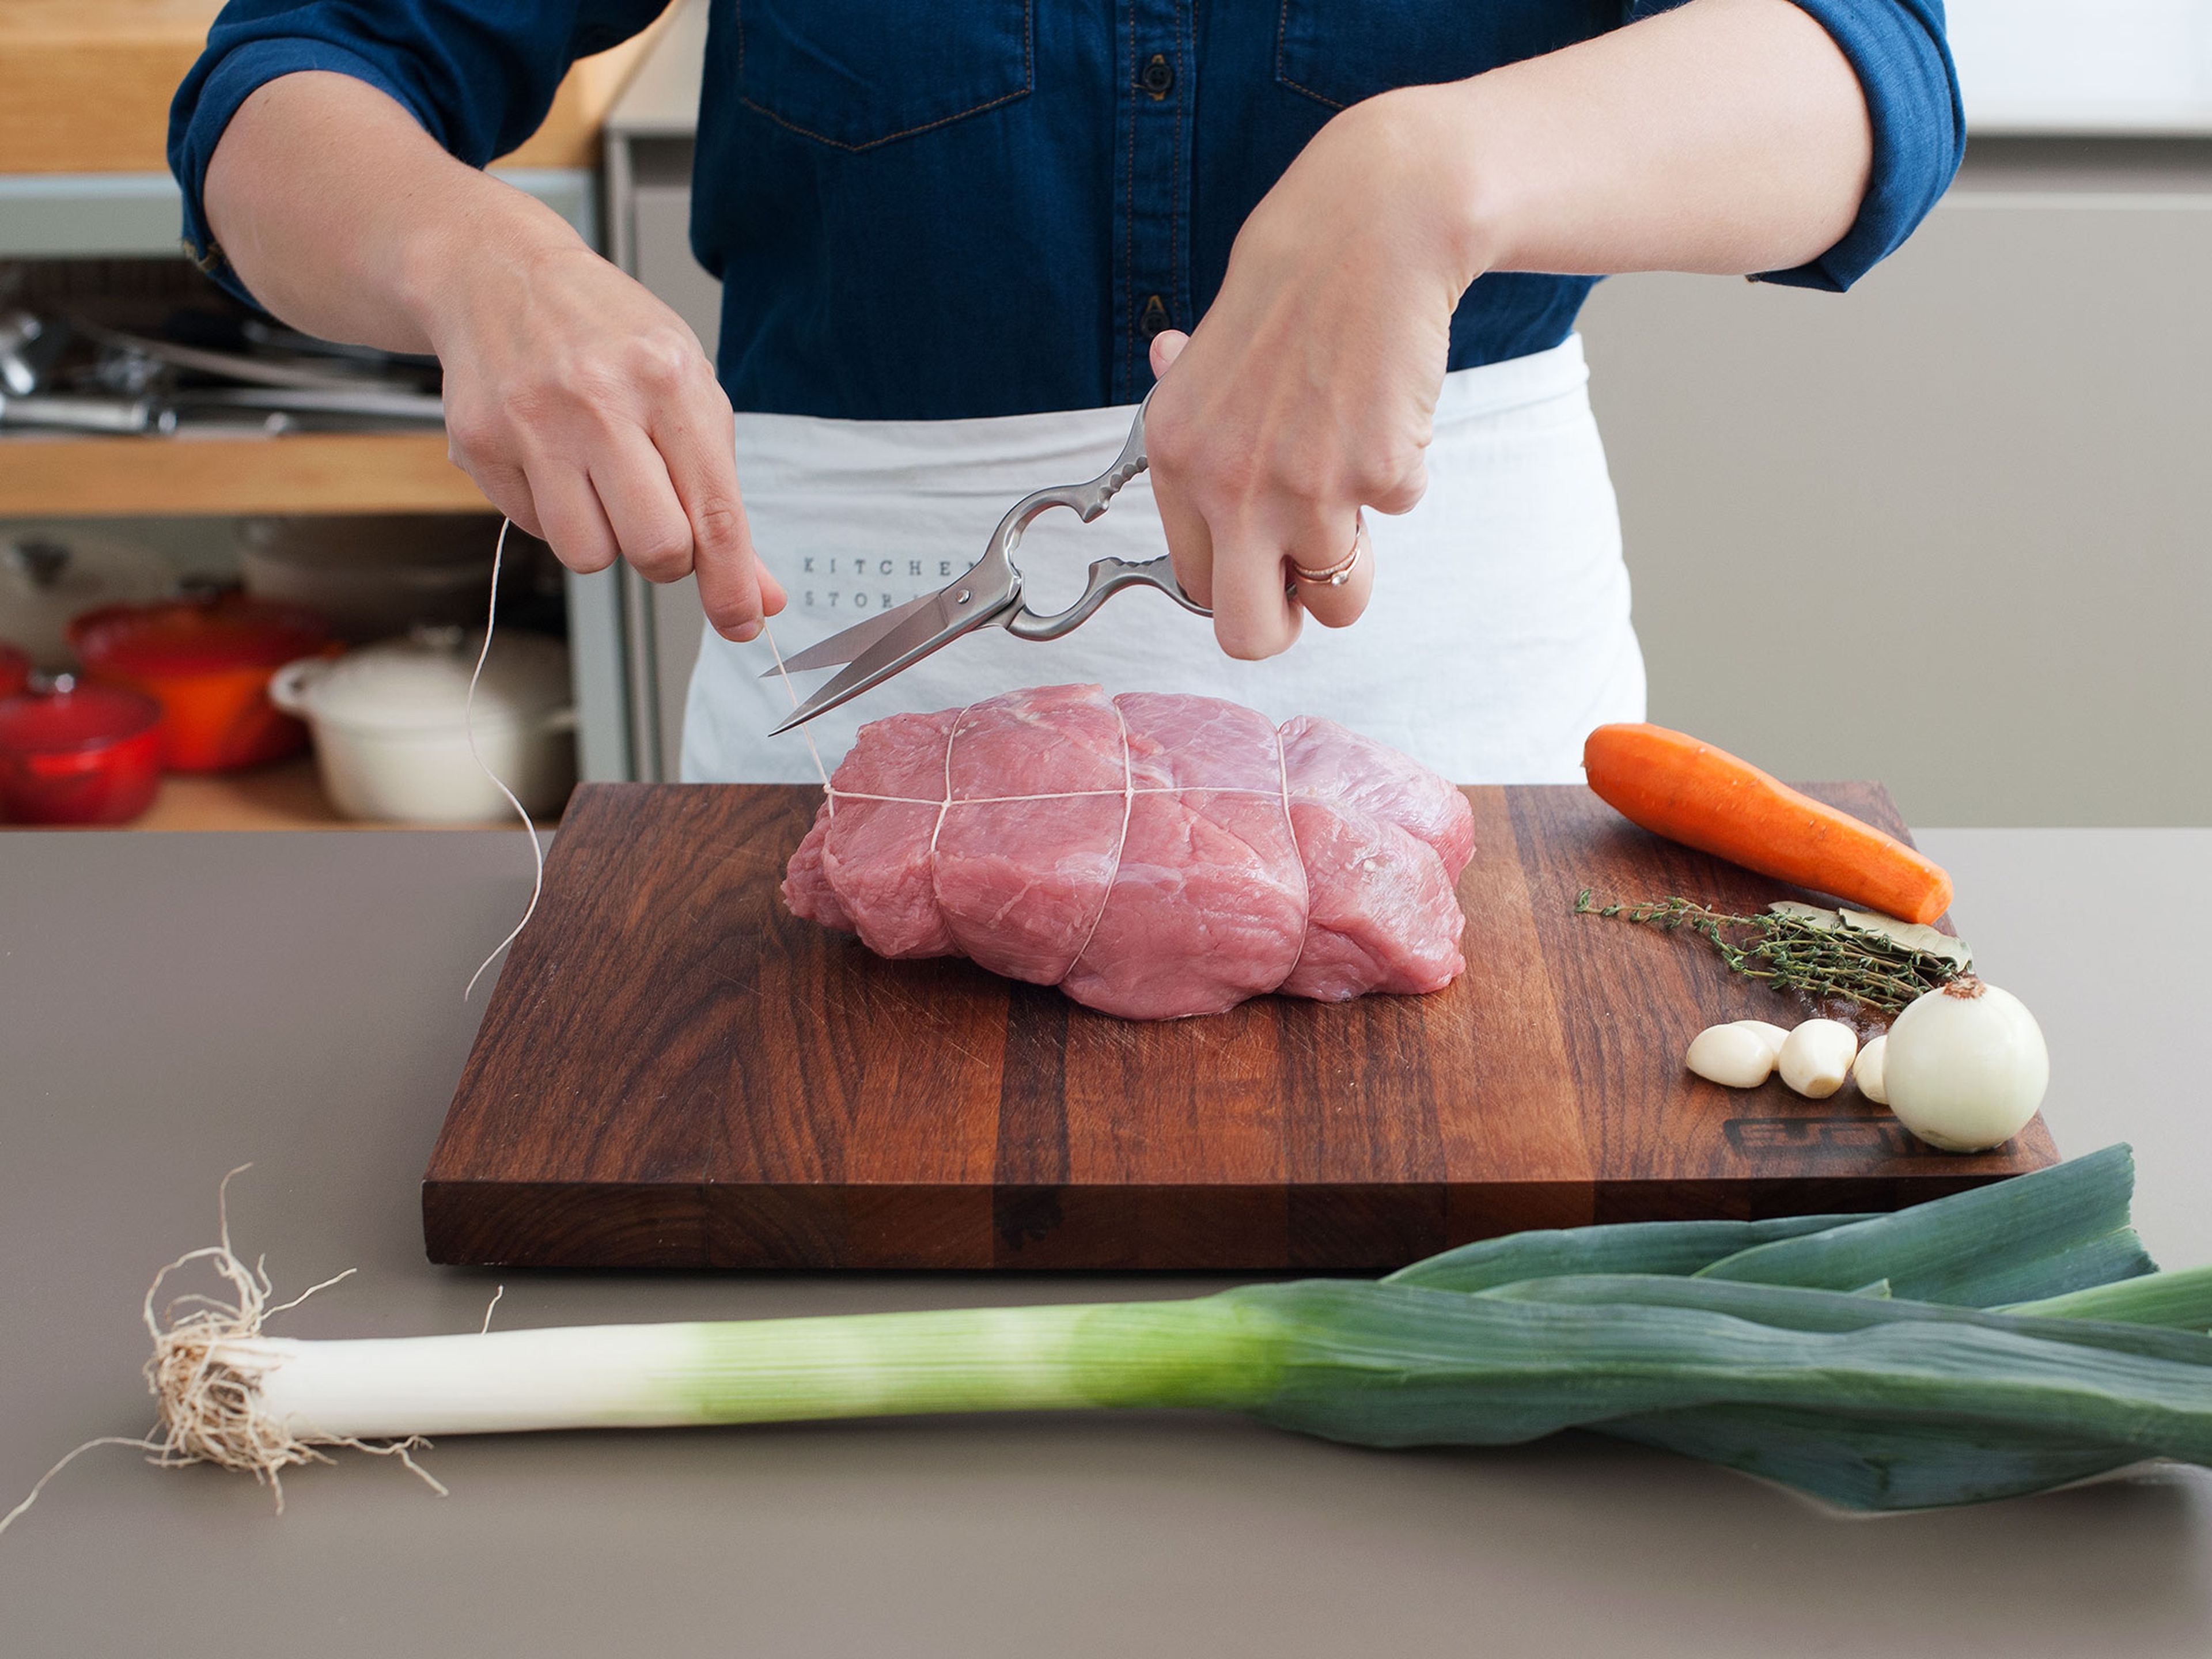 Trim excess fat from the veal and truss it with cooking string. Roughly chop celery, carrot, onion, and leek